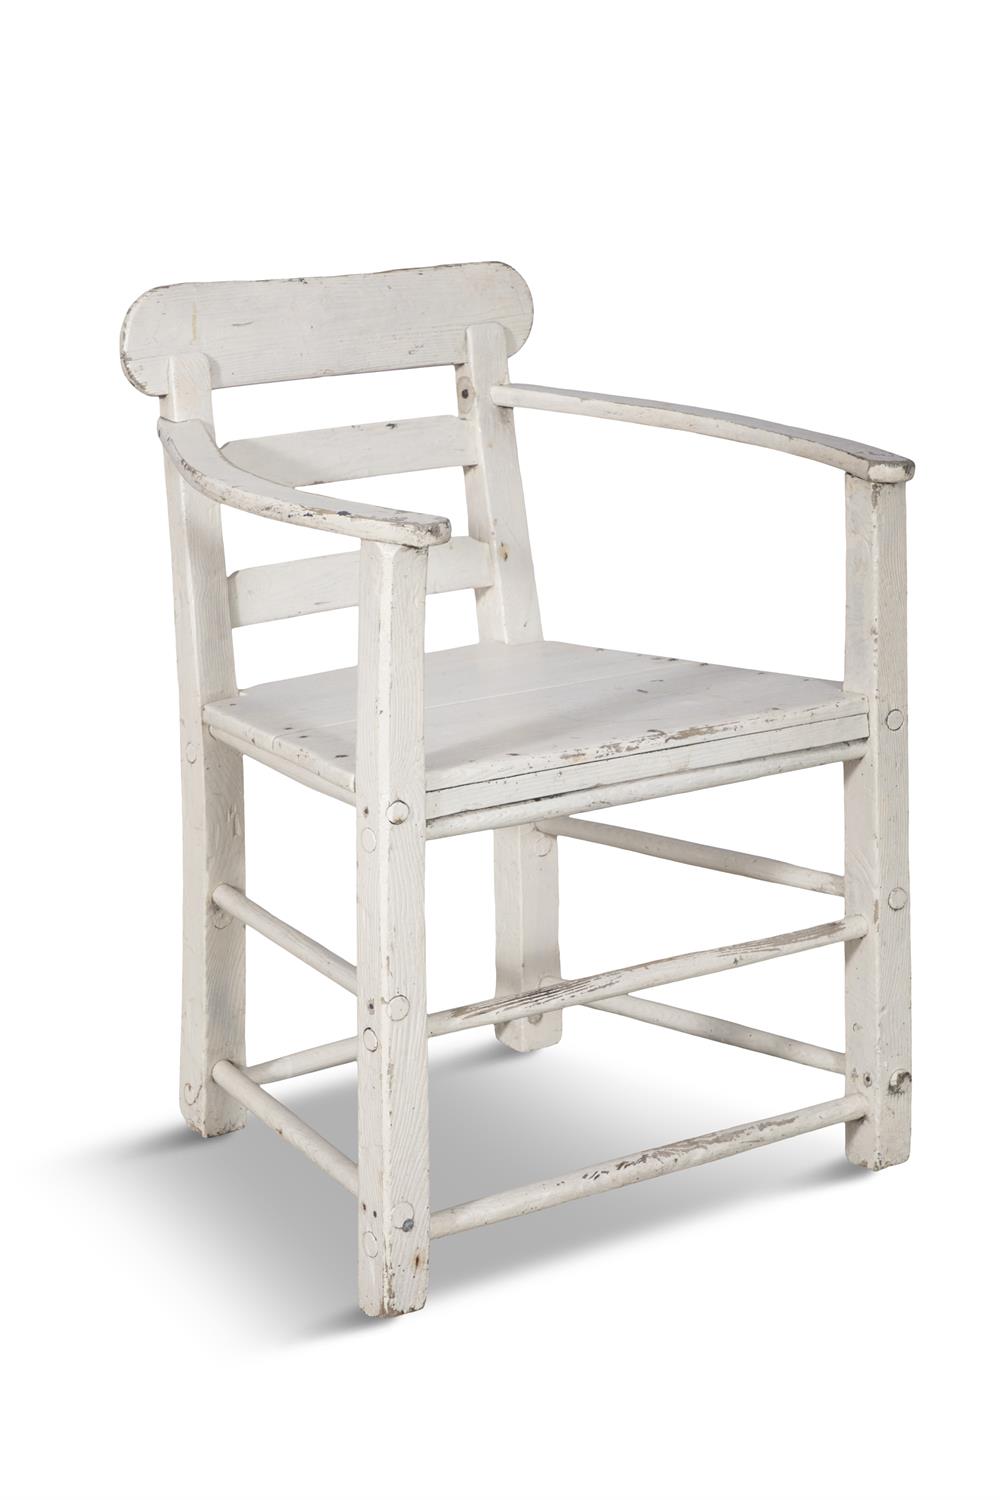 A WHITE PAINTED PINE ARCMCHAIR with ladder back and slightly bowed armrests, panelled seat and